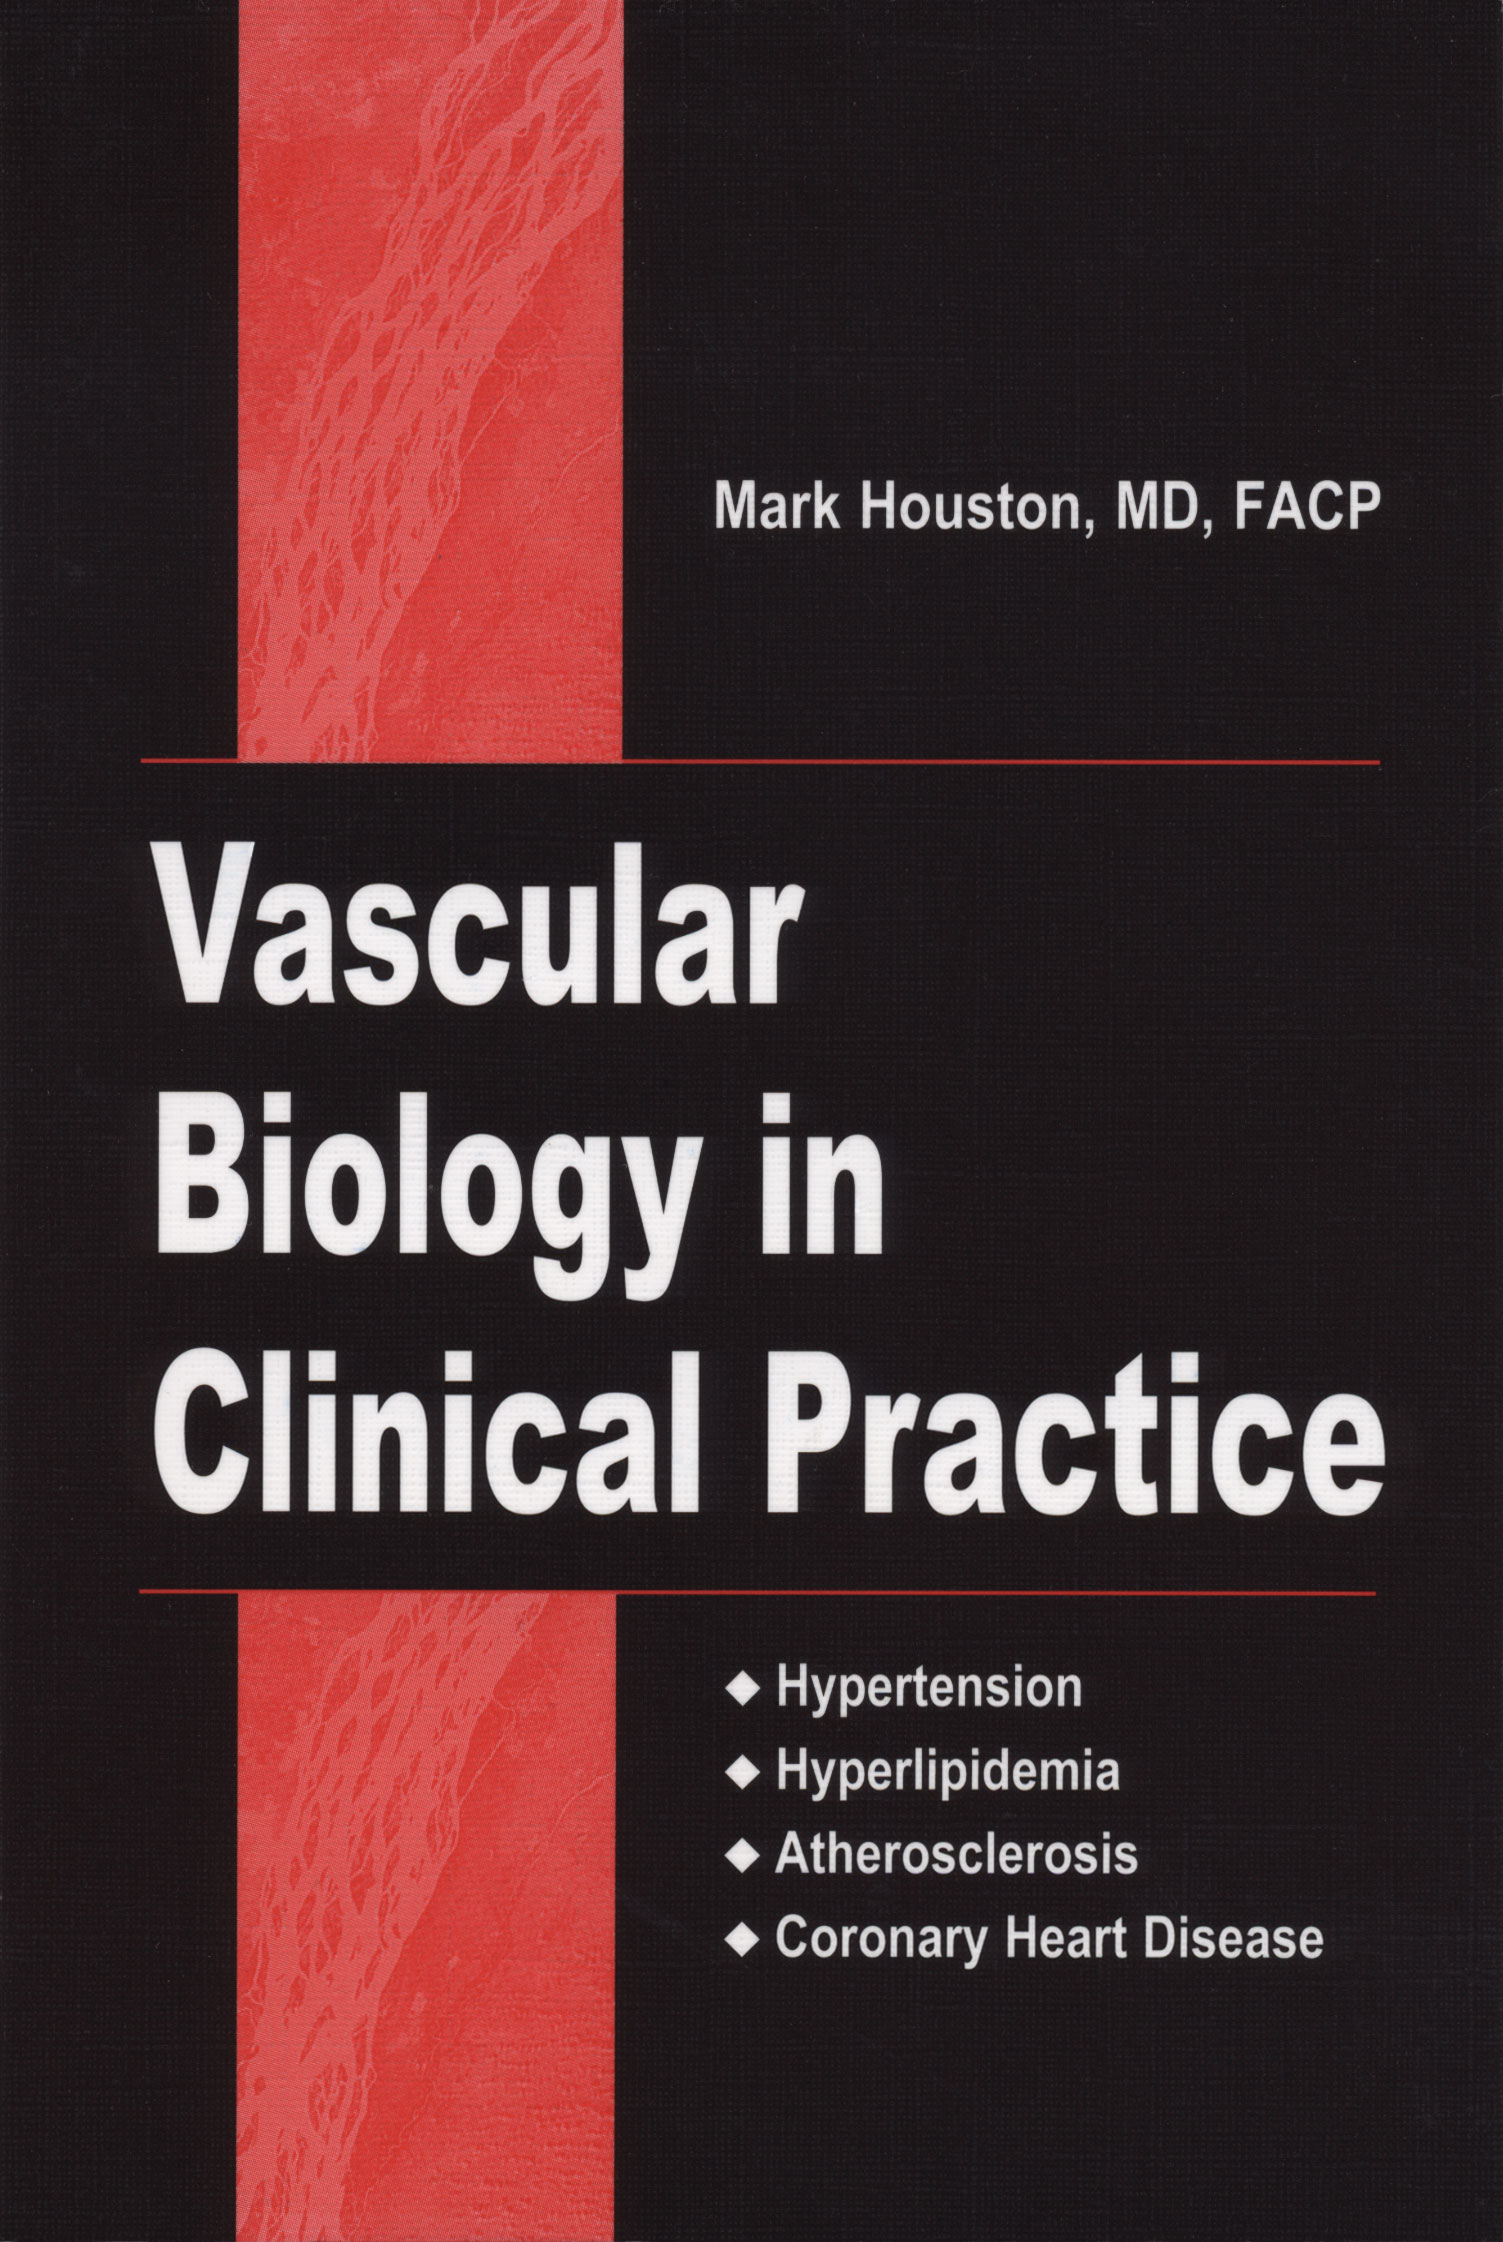 Vascular Biology in Clinical Practice